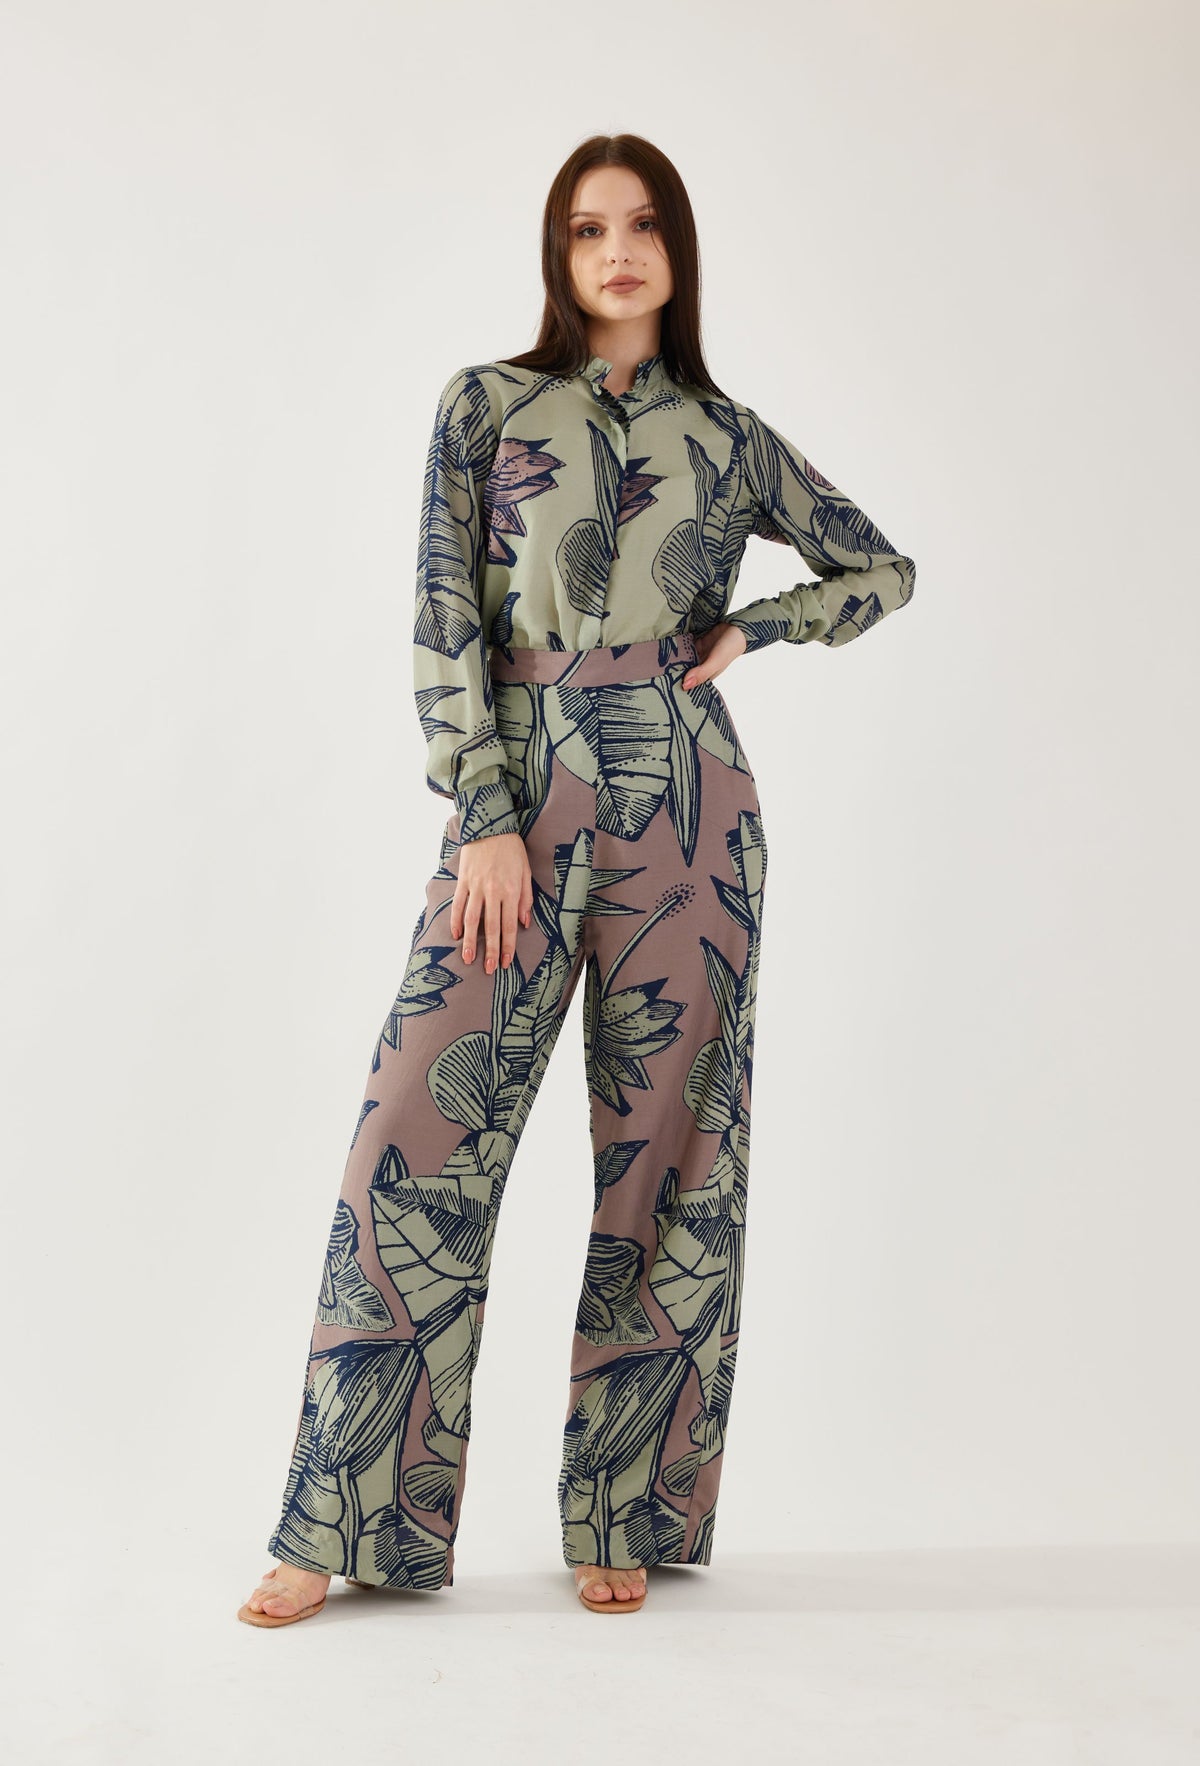 BROWN AND OLIVE FLORAL PANTS